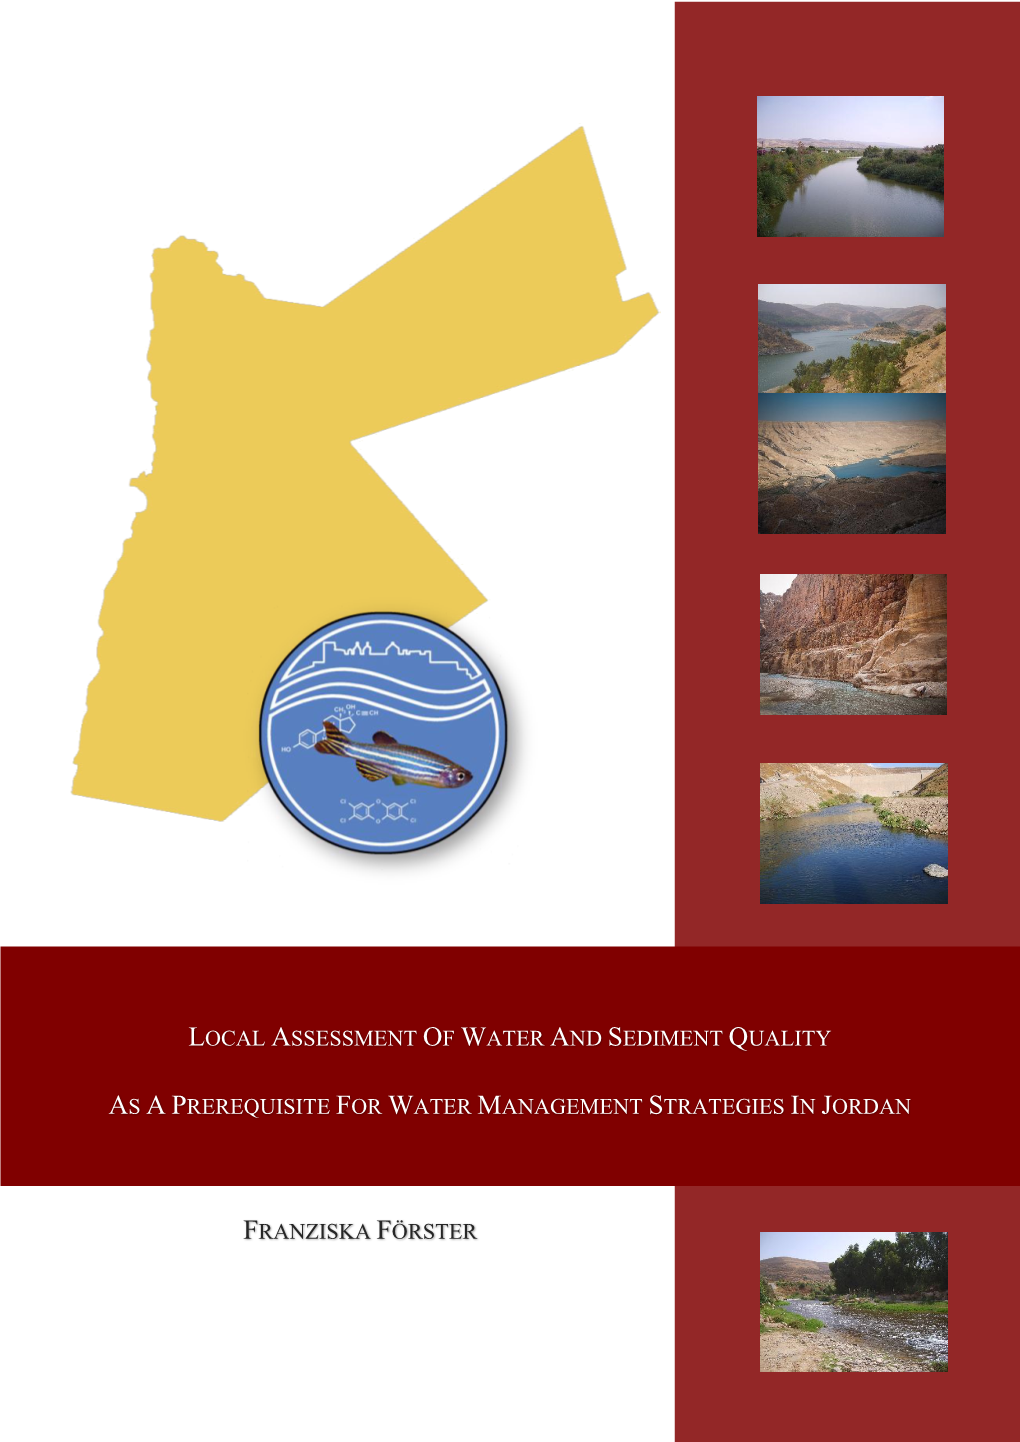 Local Assessment of Water and Sediment Quality As a Prerequisite for Water Management Strategies in Jordan